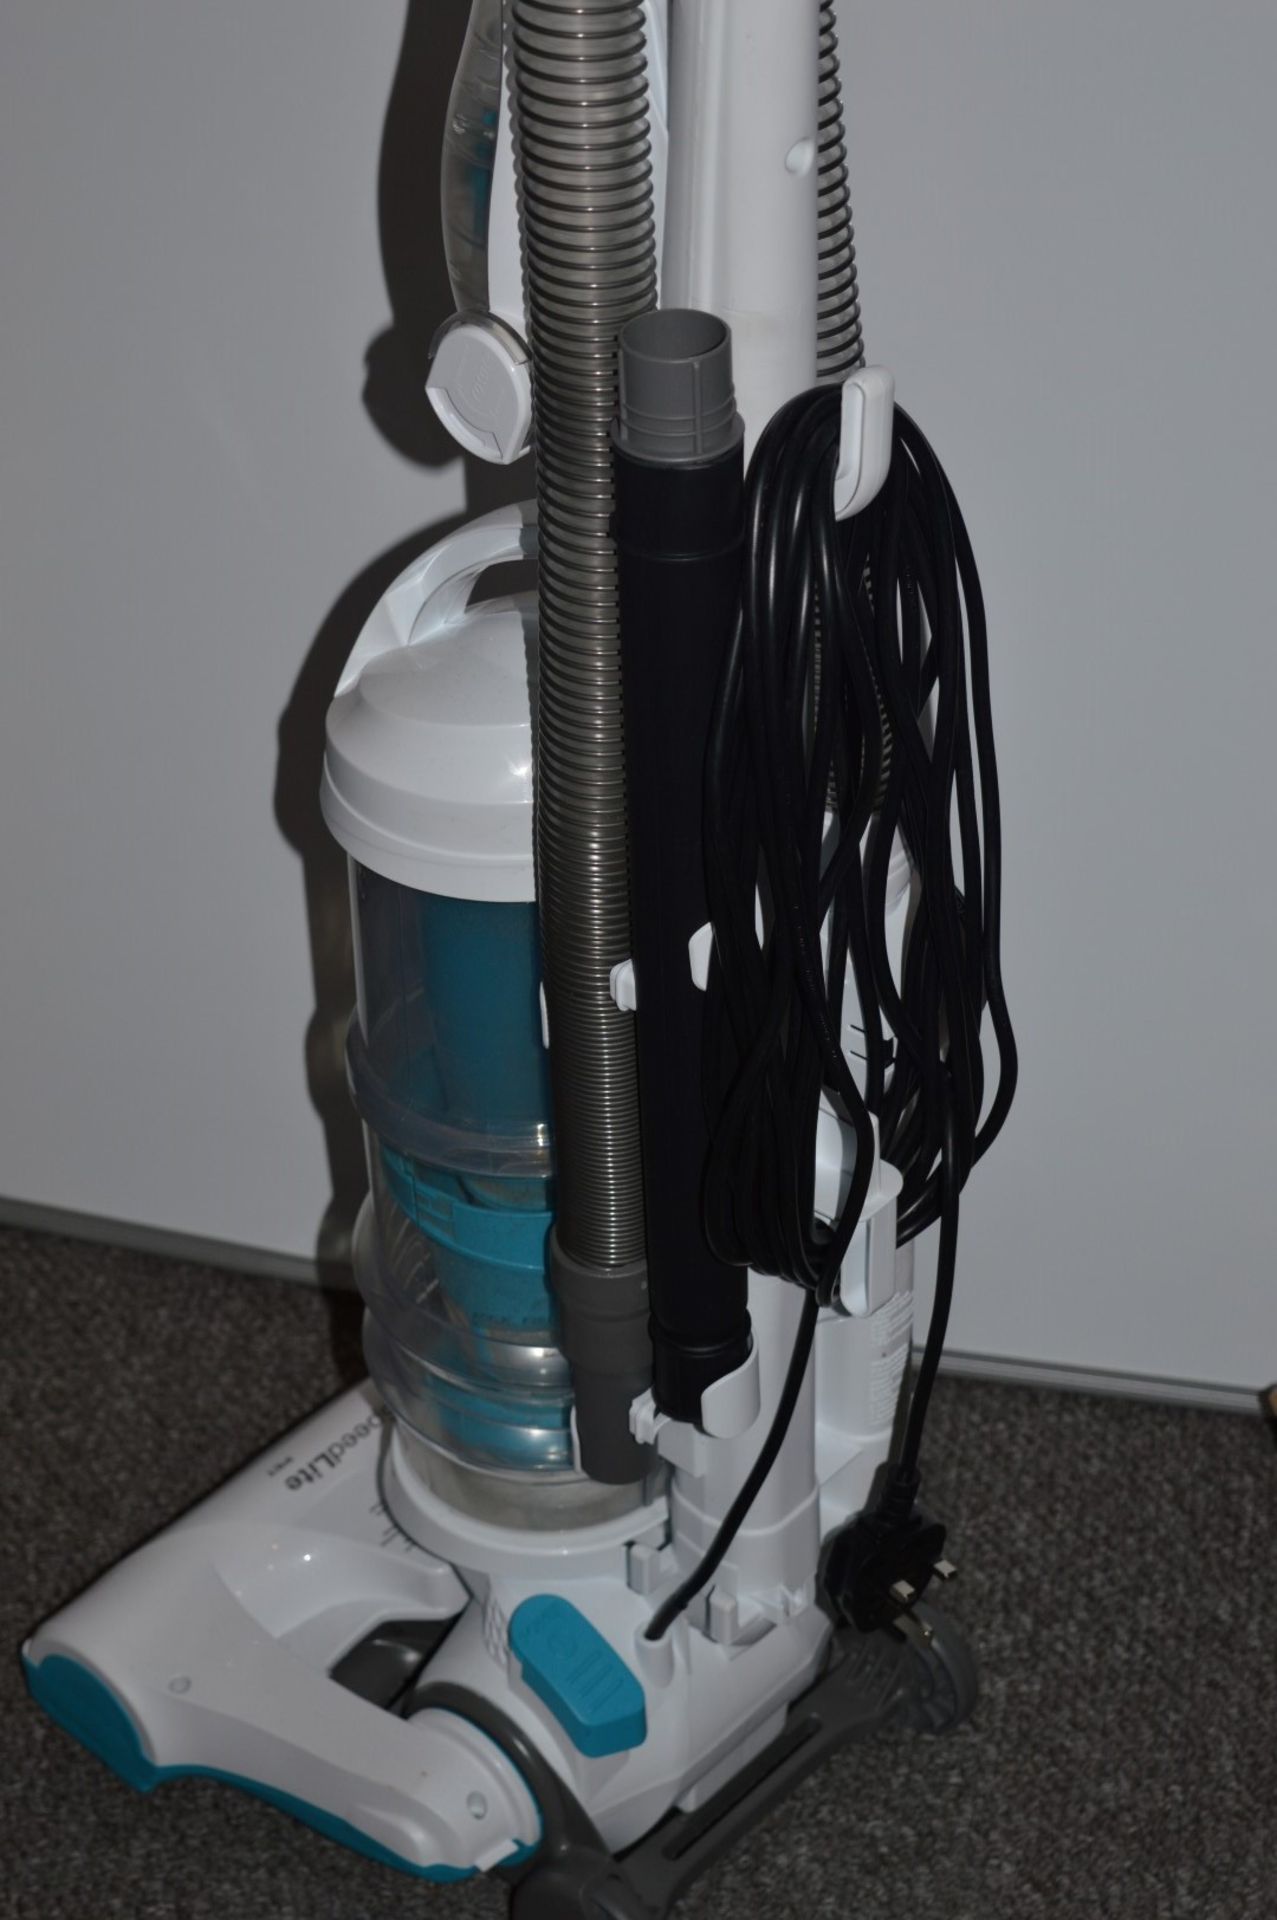 1 x Zanussi Airspeed Lite Pet Vacuum Cleaner - Includes All Accessories - Good Condition With Only - Image 5 of 6